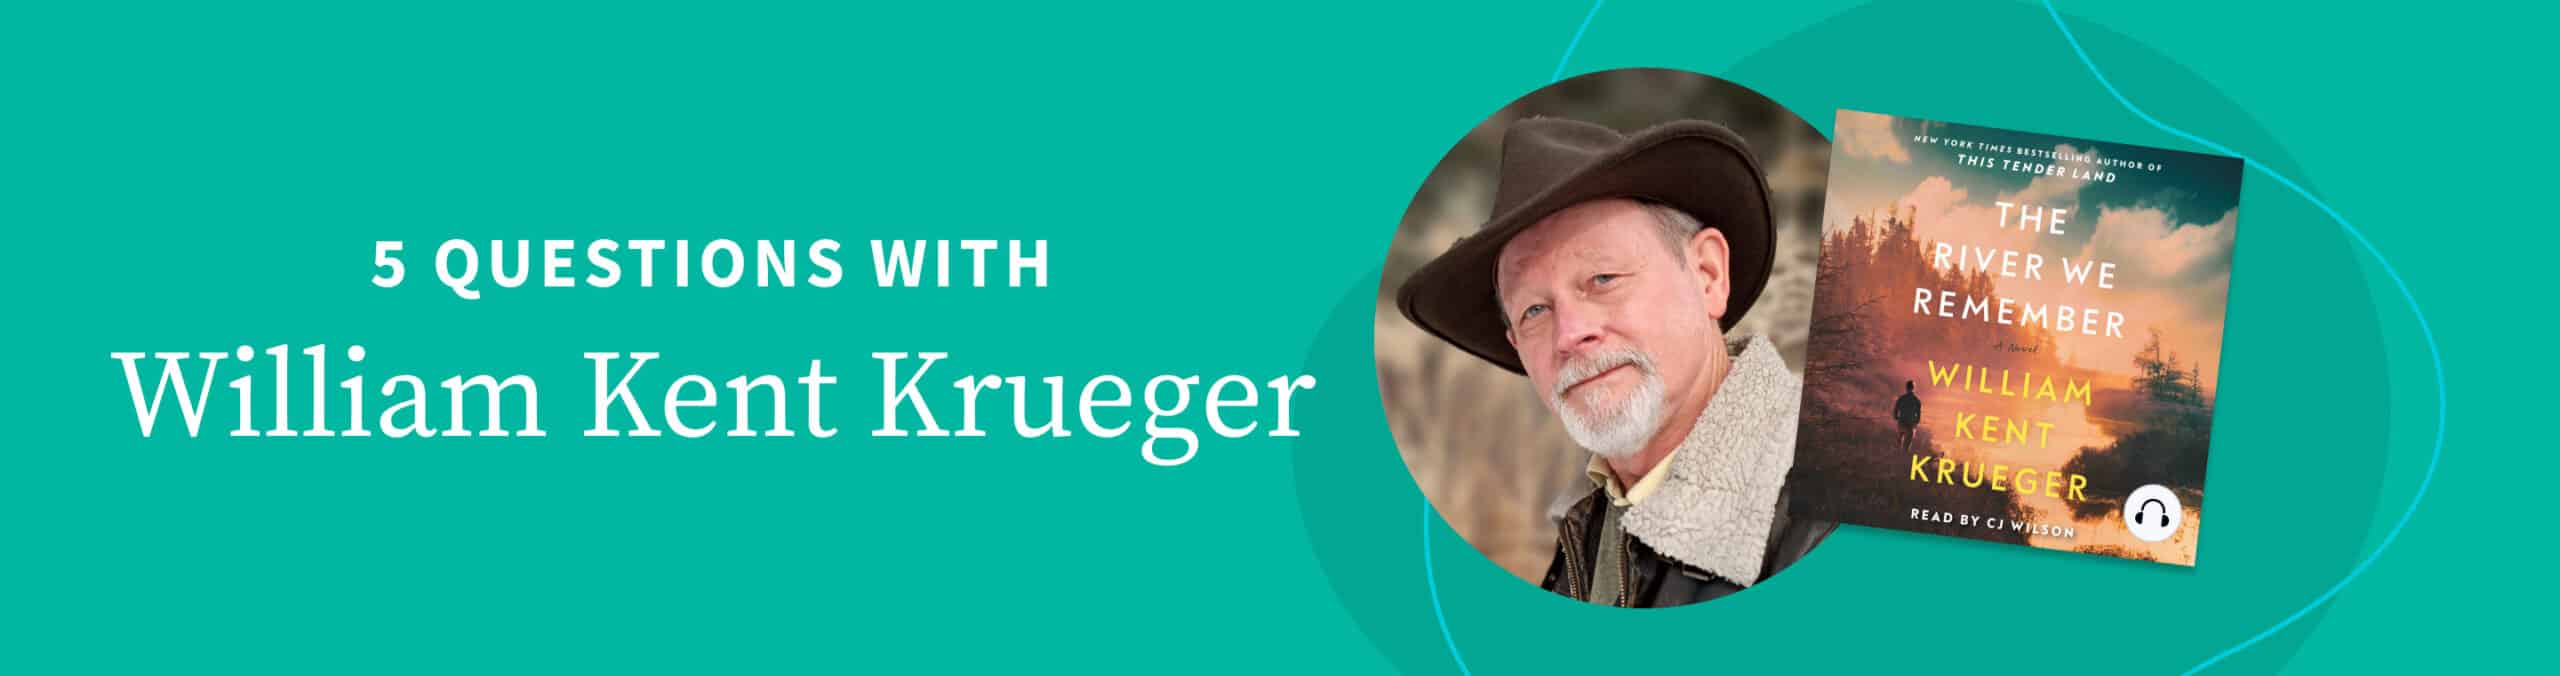 5 questions with William Kent Krueger